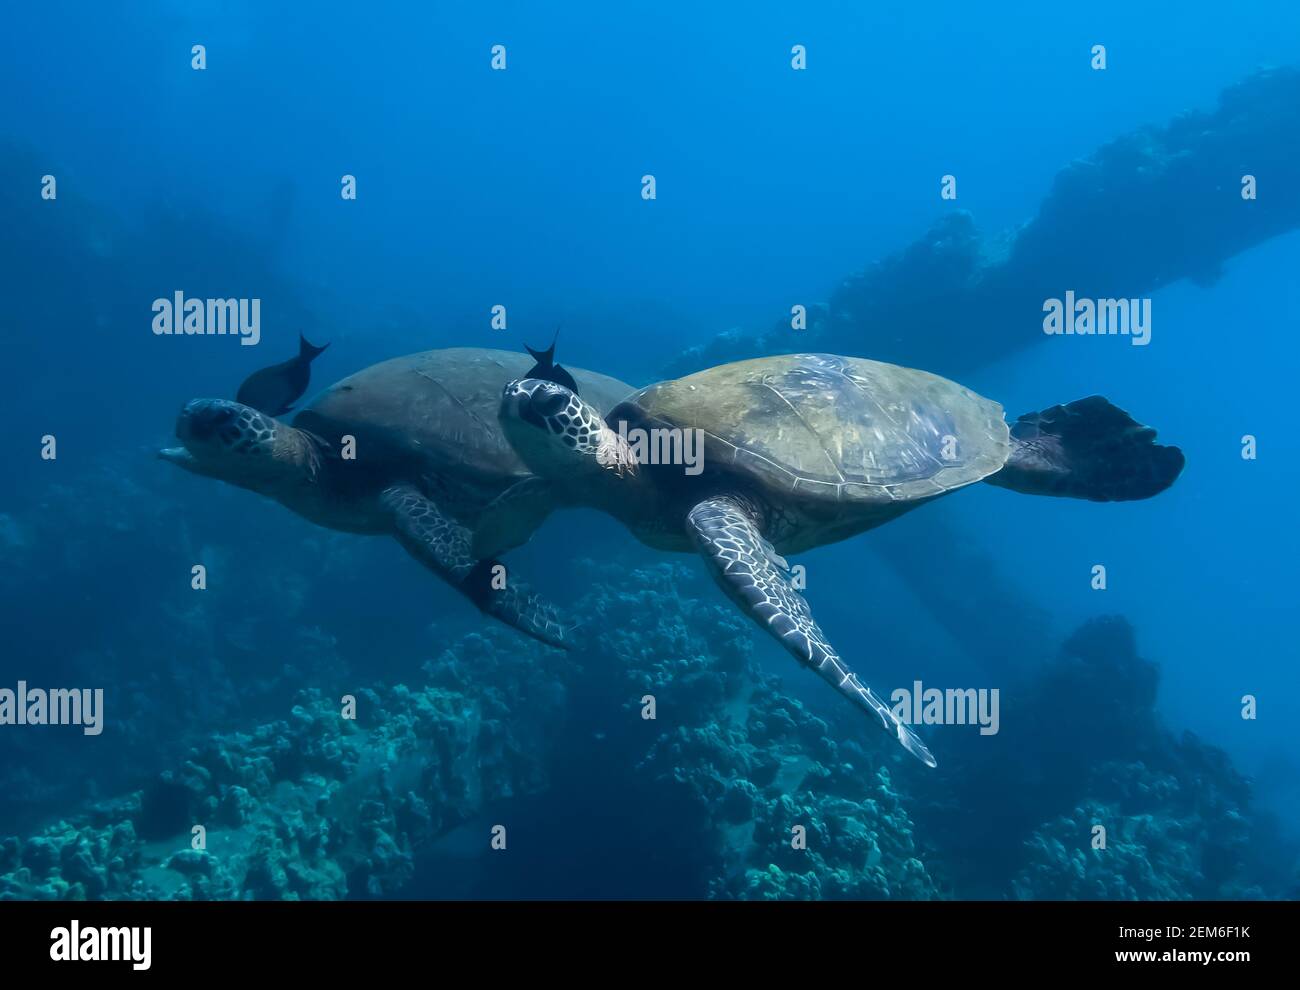 Two Hawaiian green sea turtles swim side by side over reef each with a cleaner fish working on its neck. Stock Photo